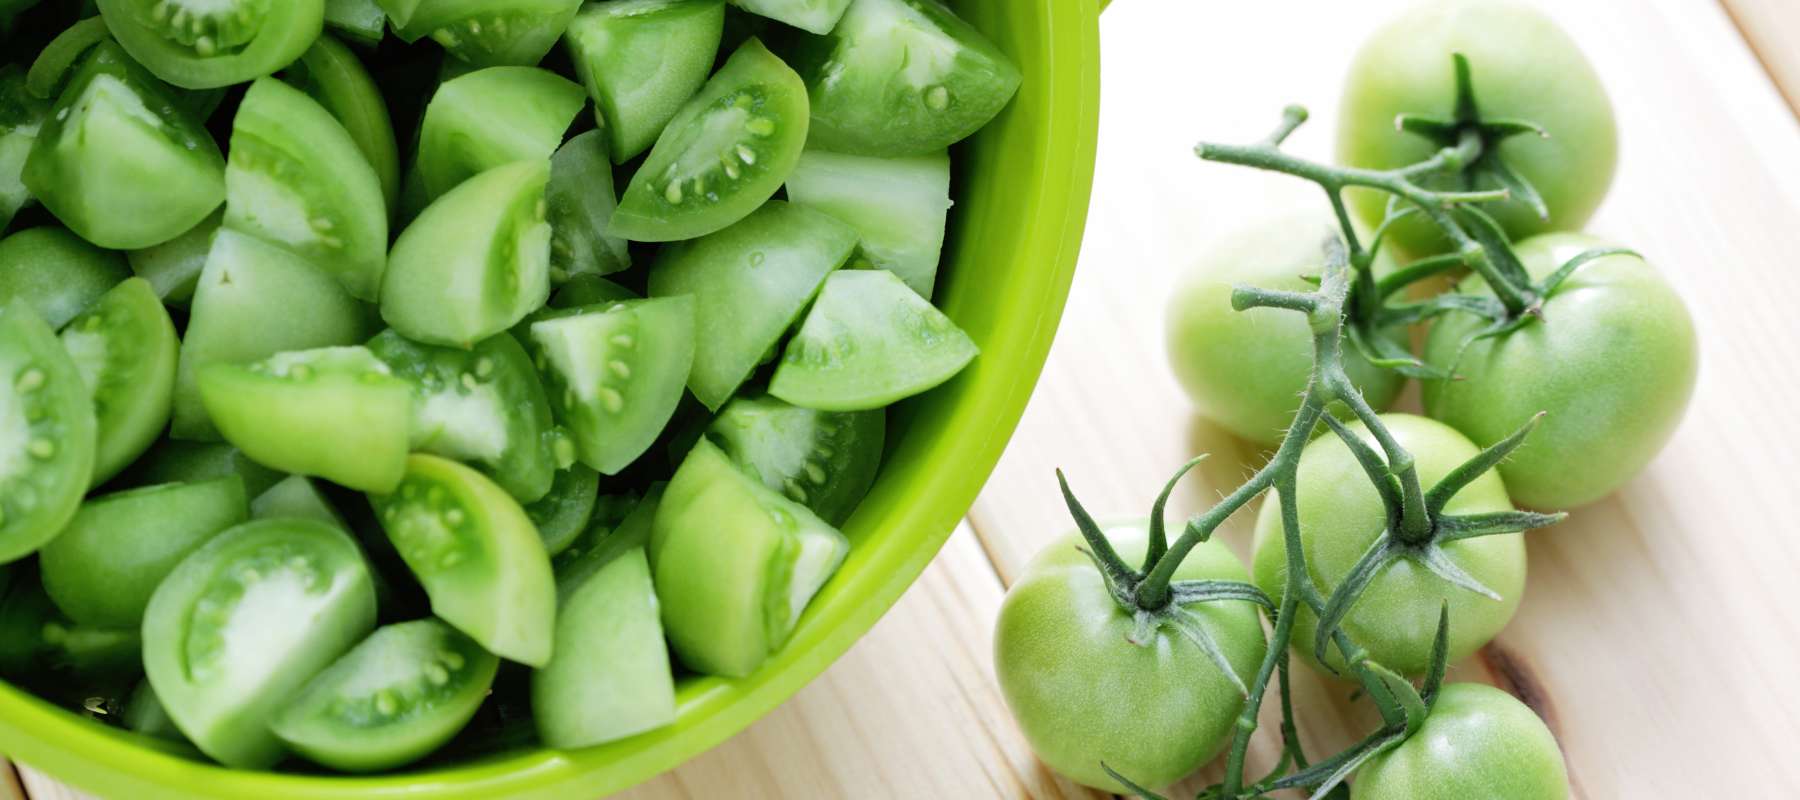 What to do with green tomatoes